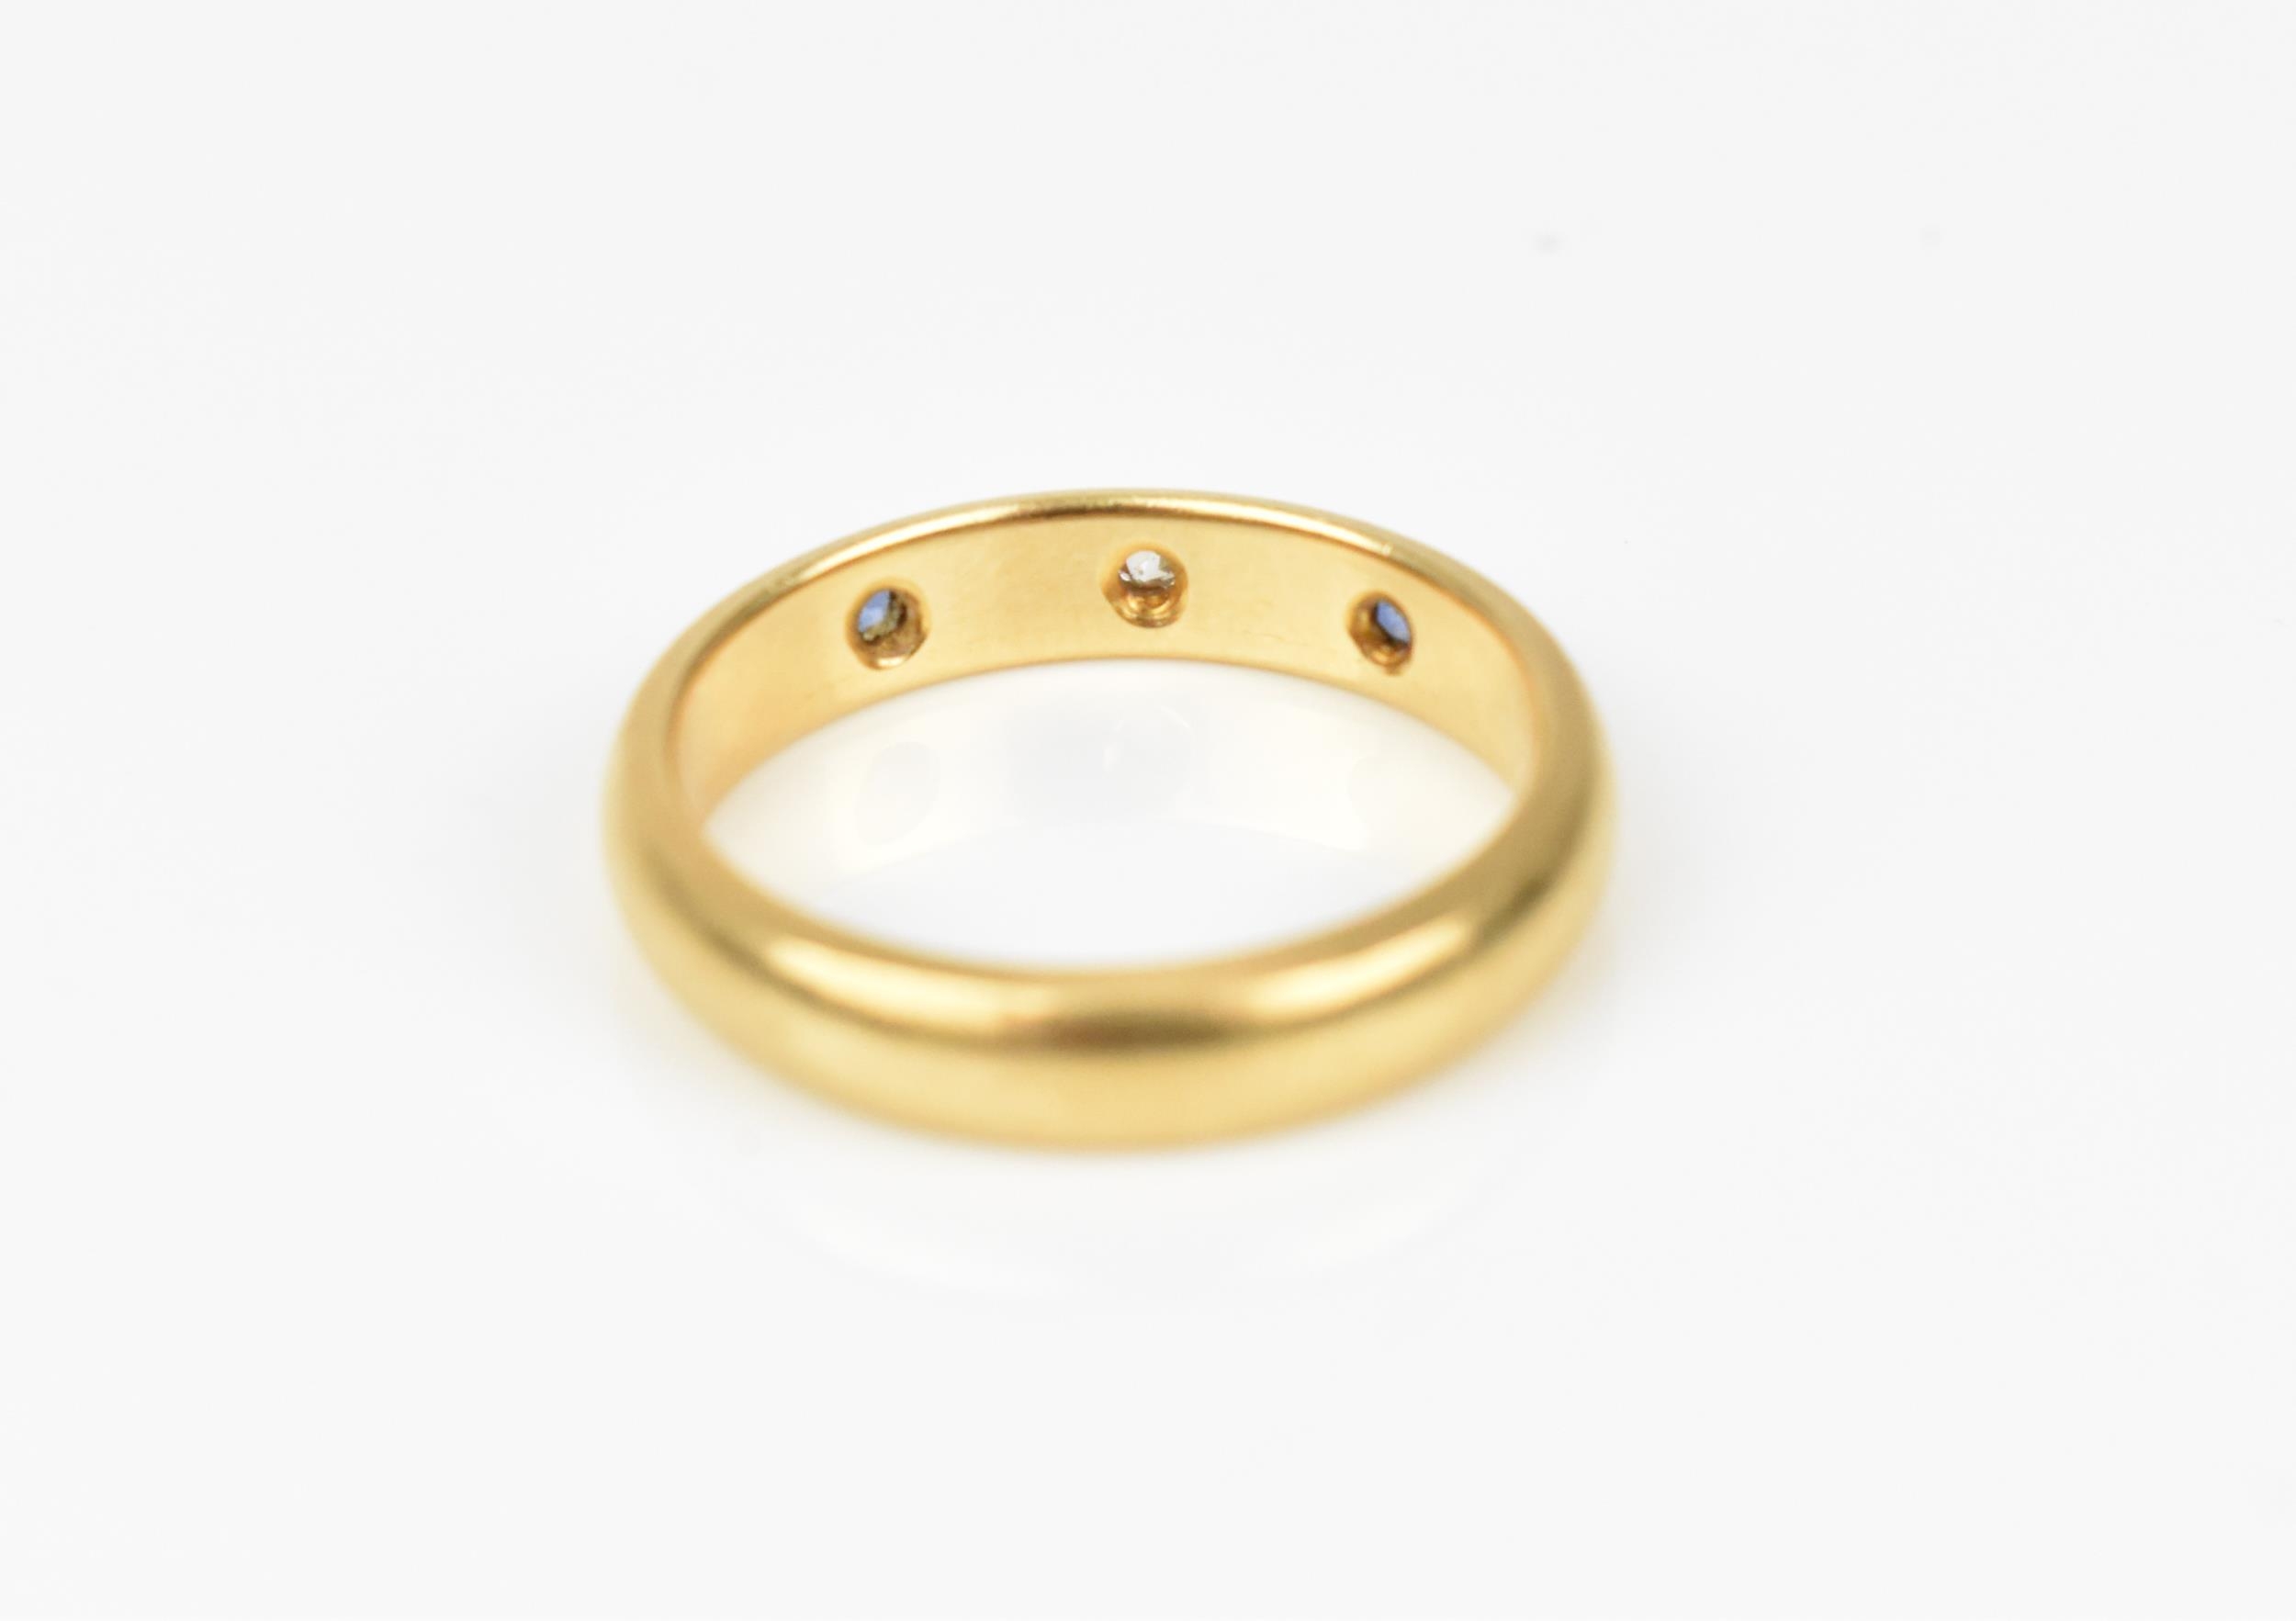 An 18ct yellow gold, diamond and sapphire gypsy ring, set with a central old cut diamond flanked - Image 2 of 4